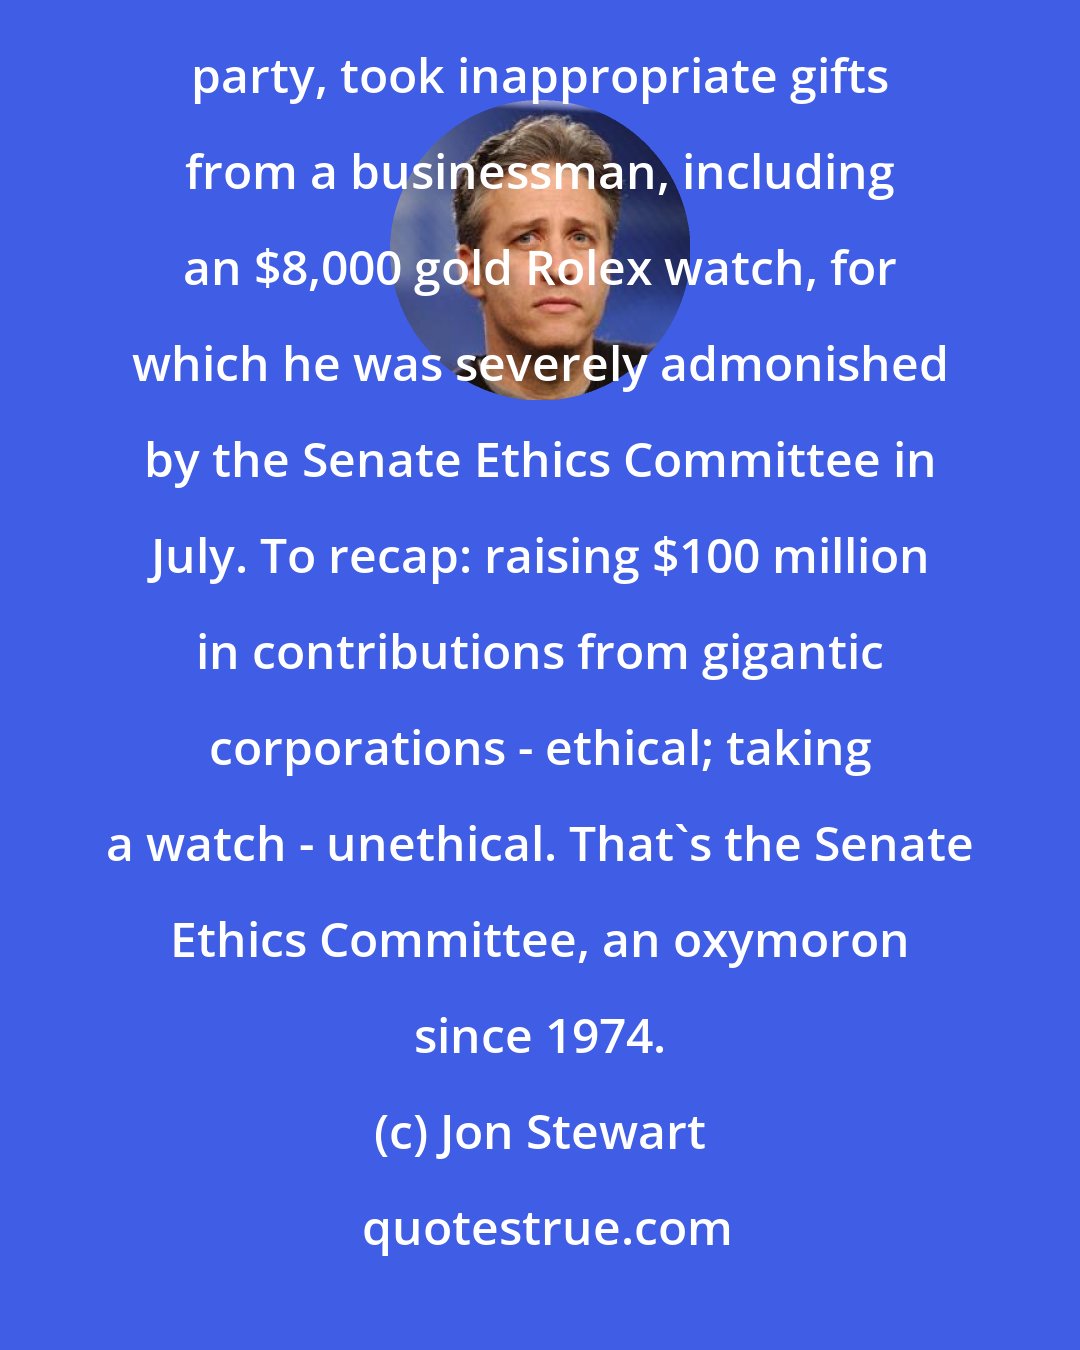 Jon Stewart: Robert Torricelli, a powerful fund-raiser who helped raise more than $100 million for the Democratic party, took inappropriate gifts from a businessman, including an $8,000 gold Rolex watch, for which he was severely admonished by the Senate Ethics Committee in July. To recap: raising $100 million in contributions from gigantic corporations - ethical; taking a watch - unethical. That's the Senate Ethics Committee, an oxymoron since 1974.